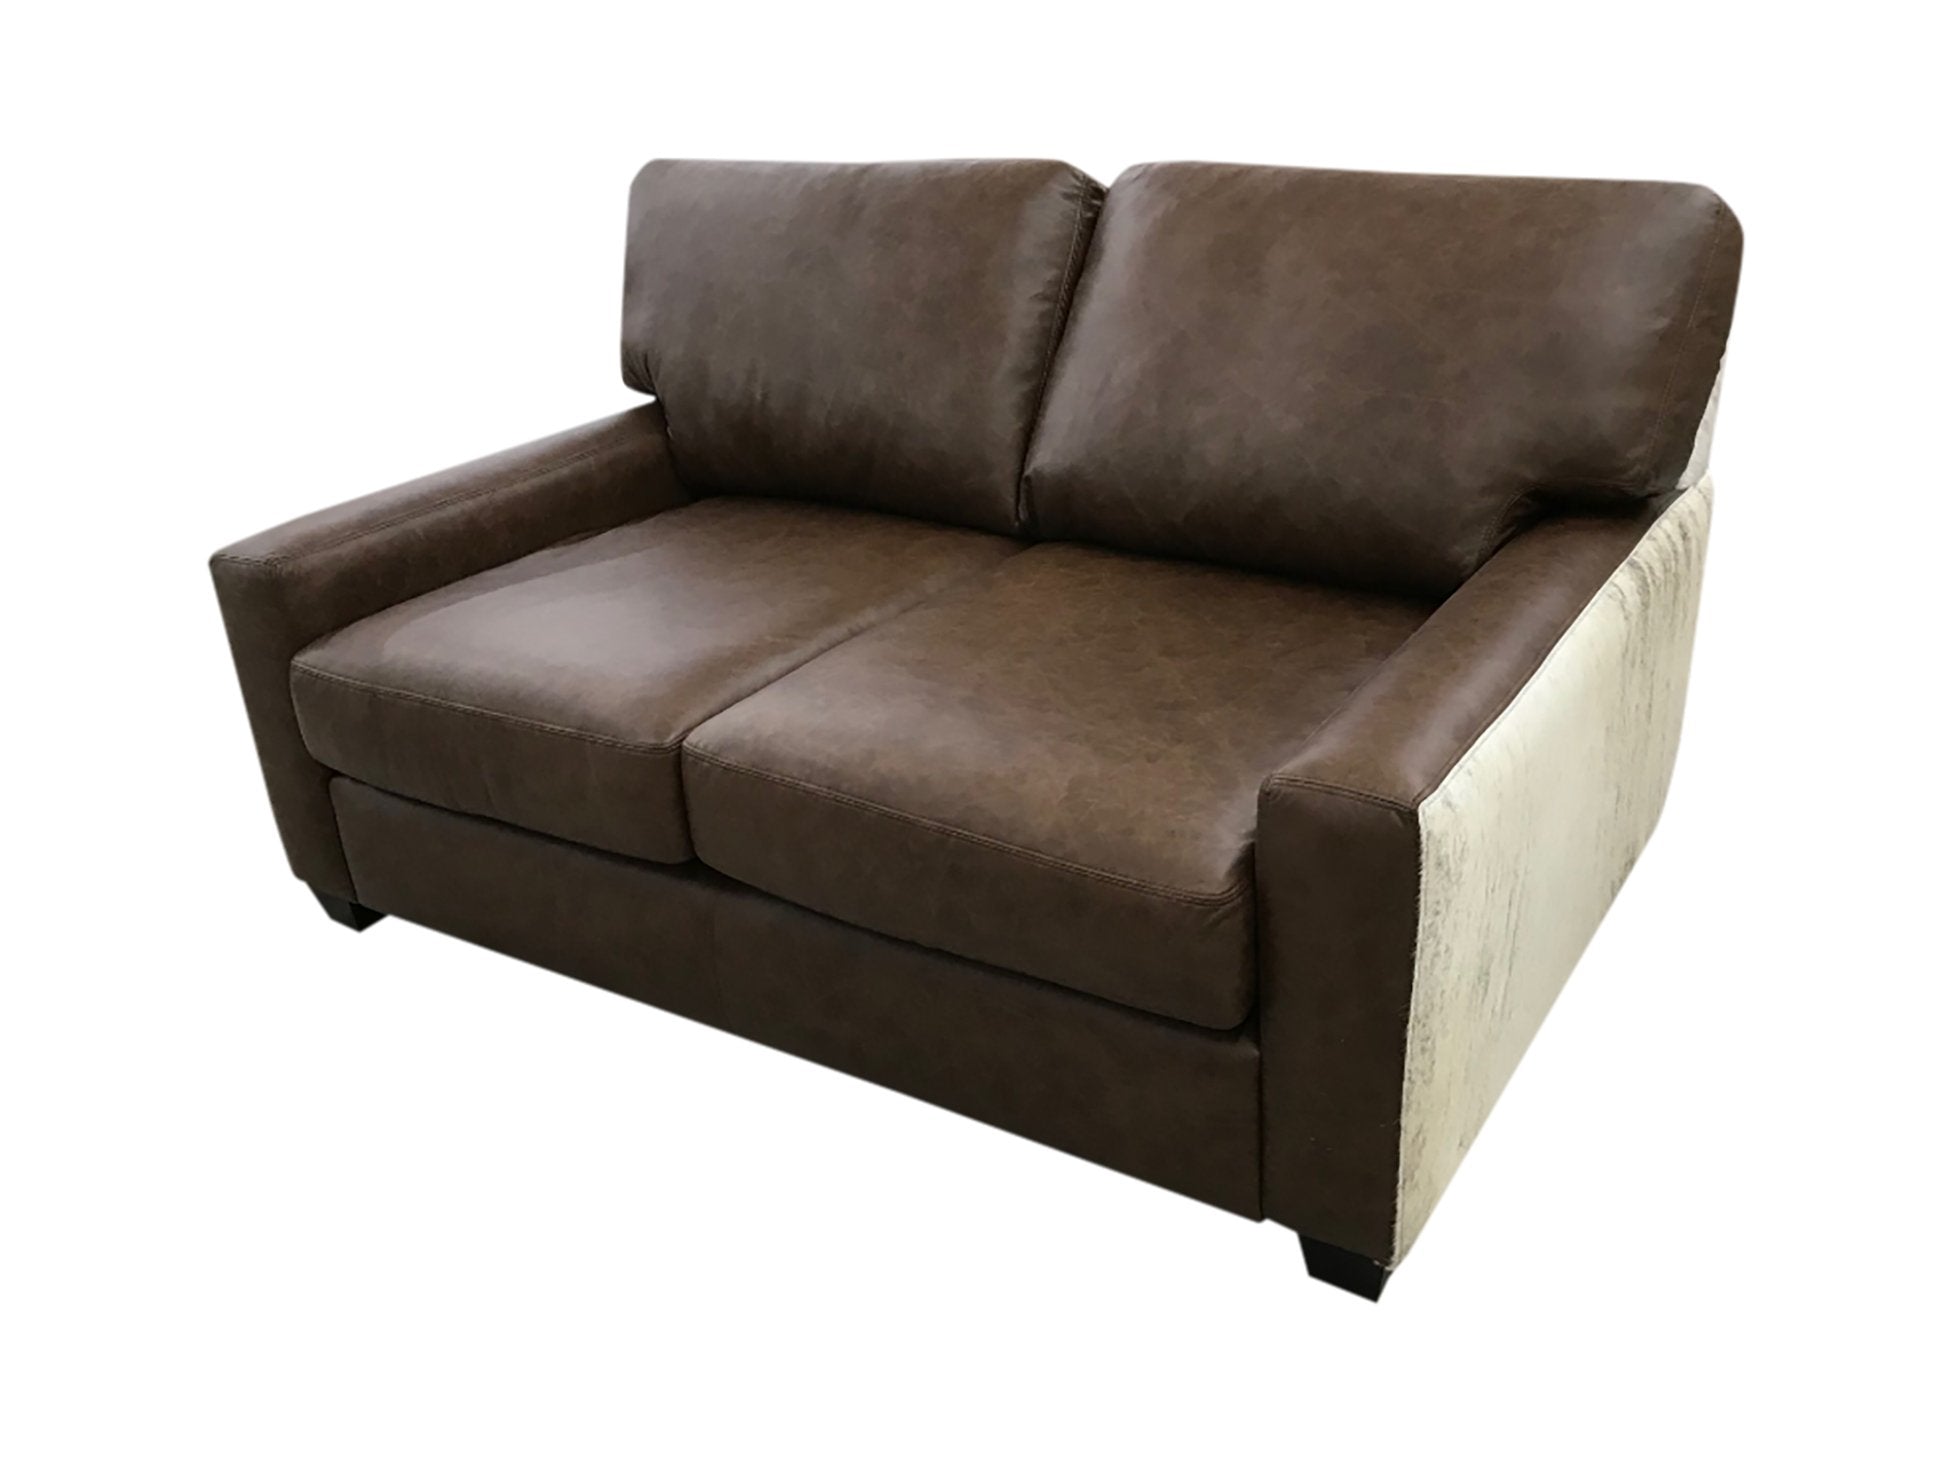 Restoration Western Contemporary Leather Love Seat